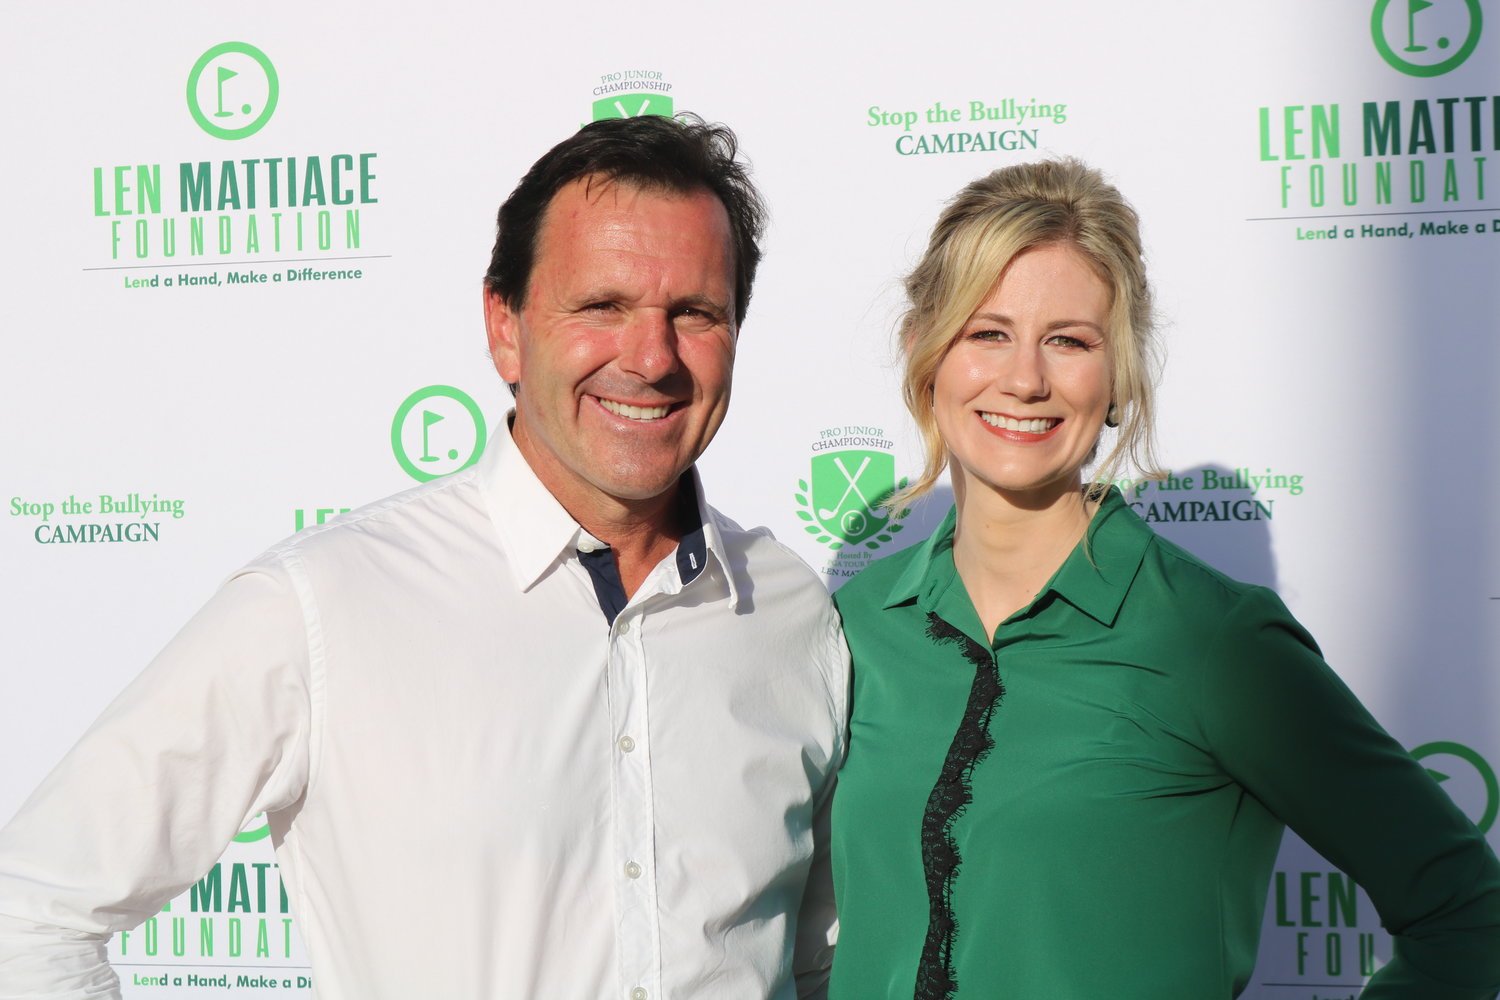 Two-time PGA TOUR winner Len Mattiace and Kaitlyn Chana at the Rolls Royce Players Party on Friday, March 12. The exclusive charity event was designed to benefit kids’ programs through Mattiace’s foundation.